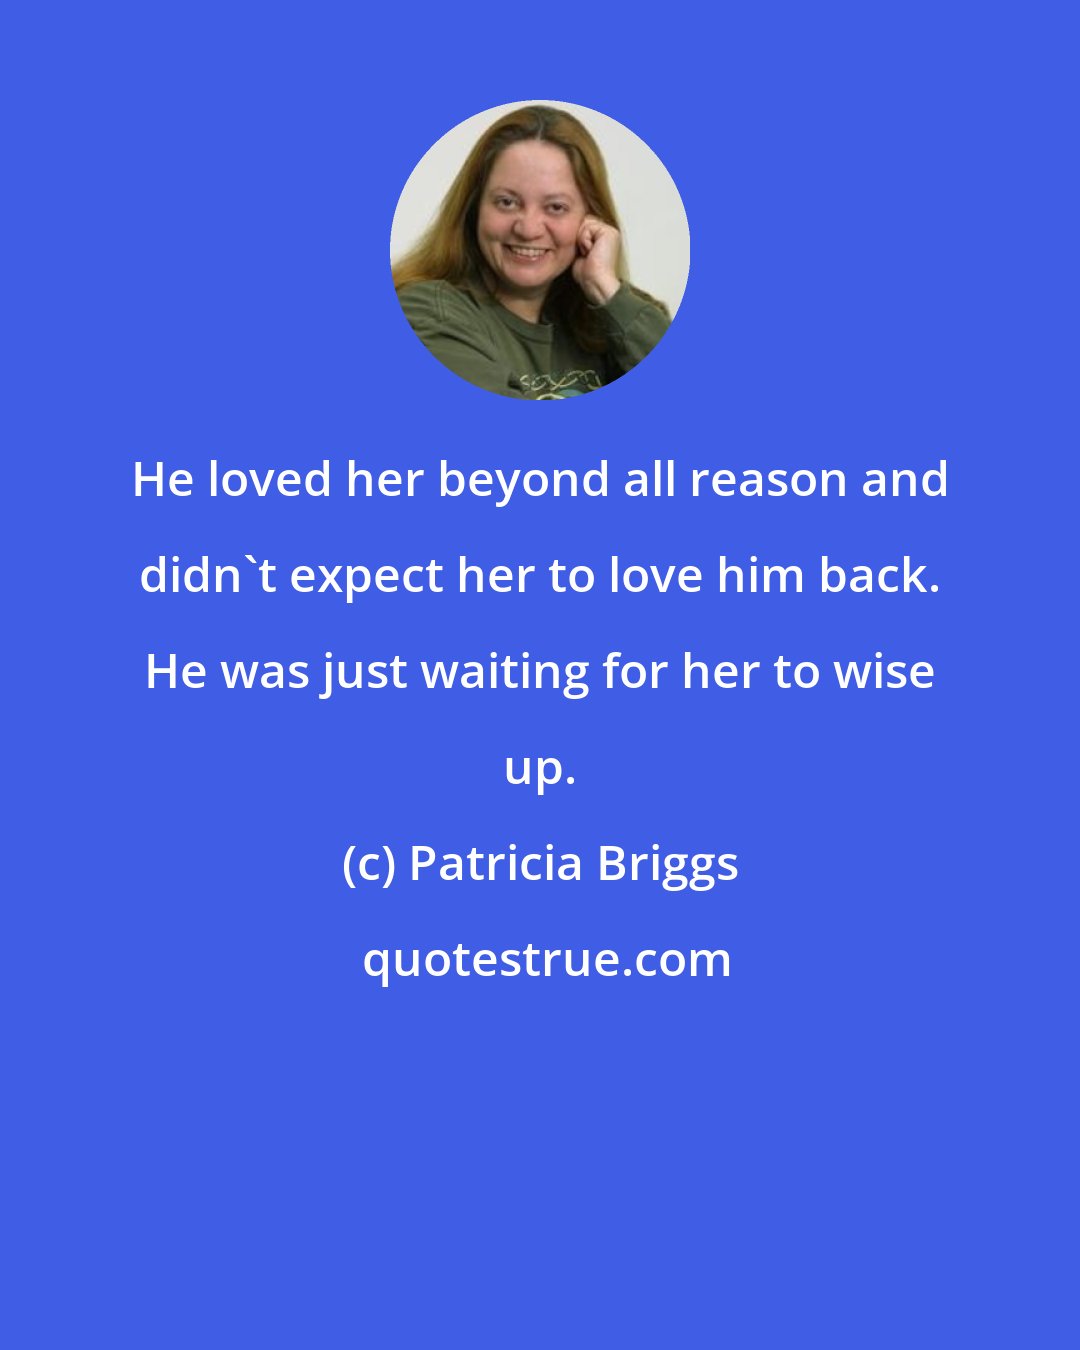 Patricia Briggs: He loved her beyond all reason and didn't expect her to love him back. He was just waiting for her to wise up.